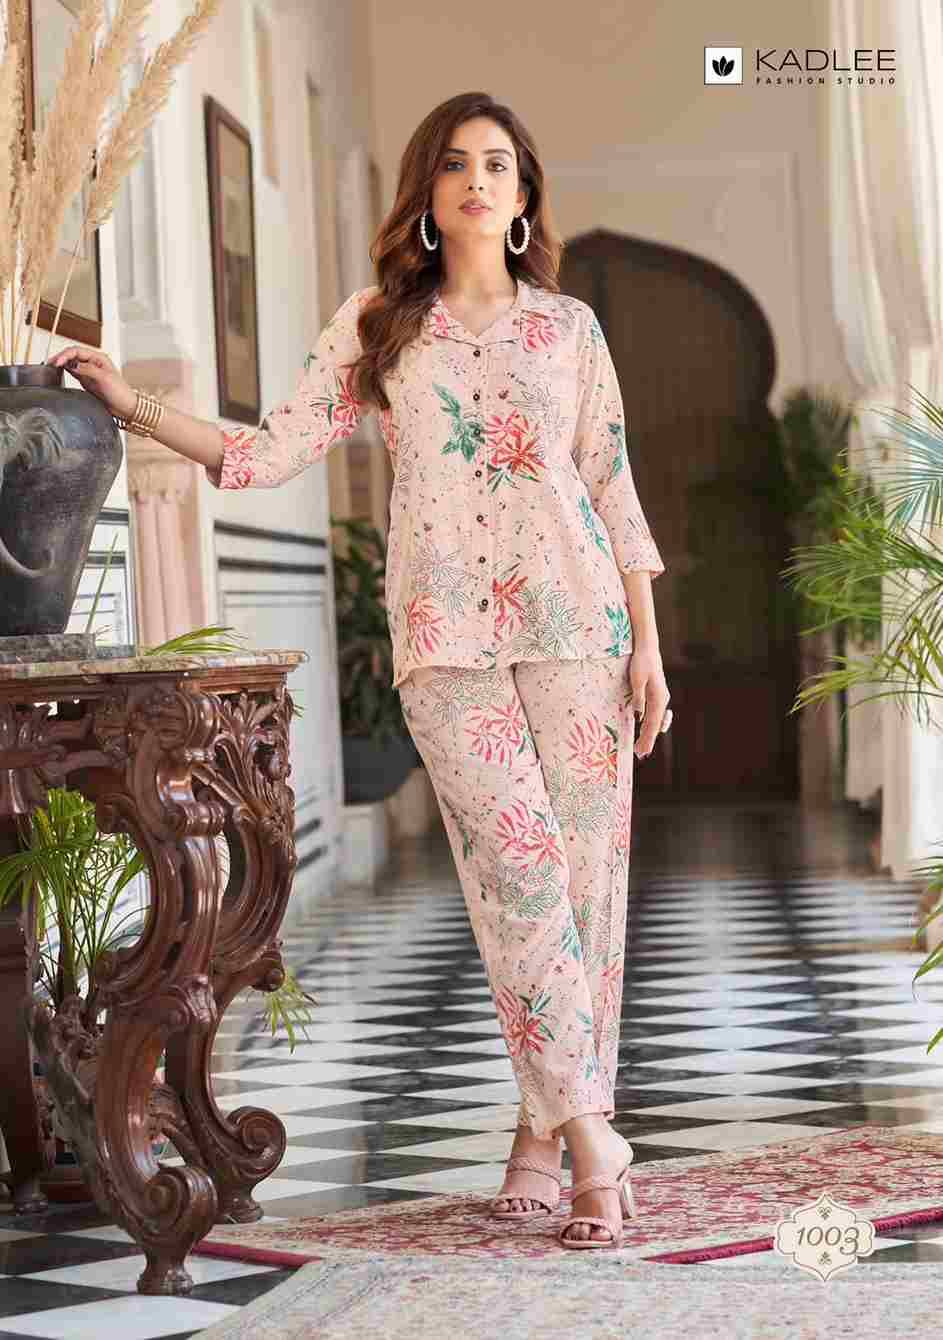 Glory By Kadlee 1001 To 1004 Series Designer Stylish Fancy Colorful Beautiful Party Wear & Ethnic Wear Collection Viscose Slub Print Tops With Bottom At Wholesale Price